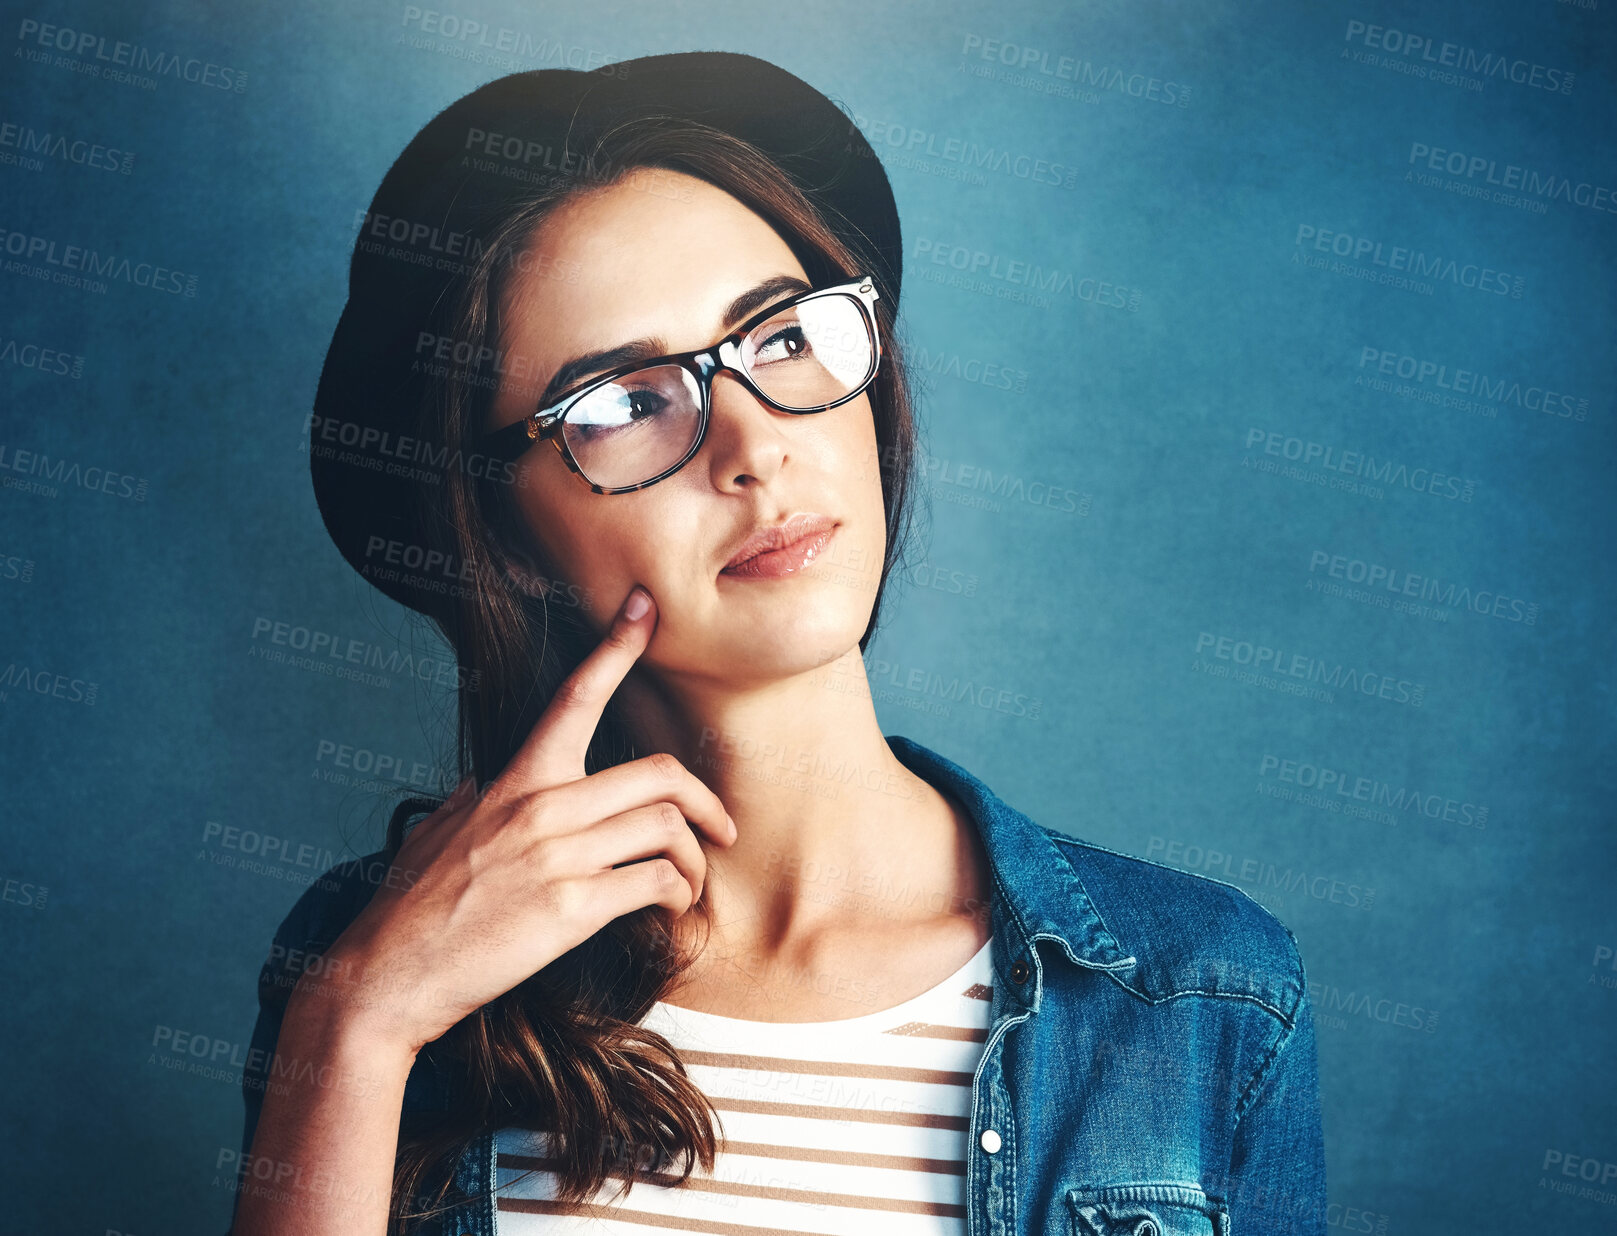 Buy stock photo Studio shot of an attractive young woman looking thoughtful against a blue background